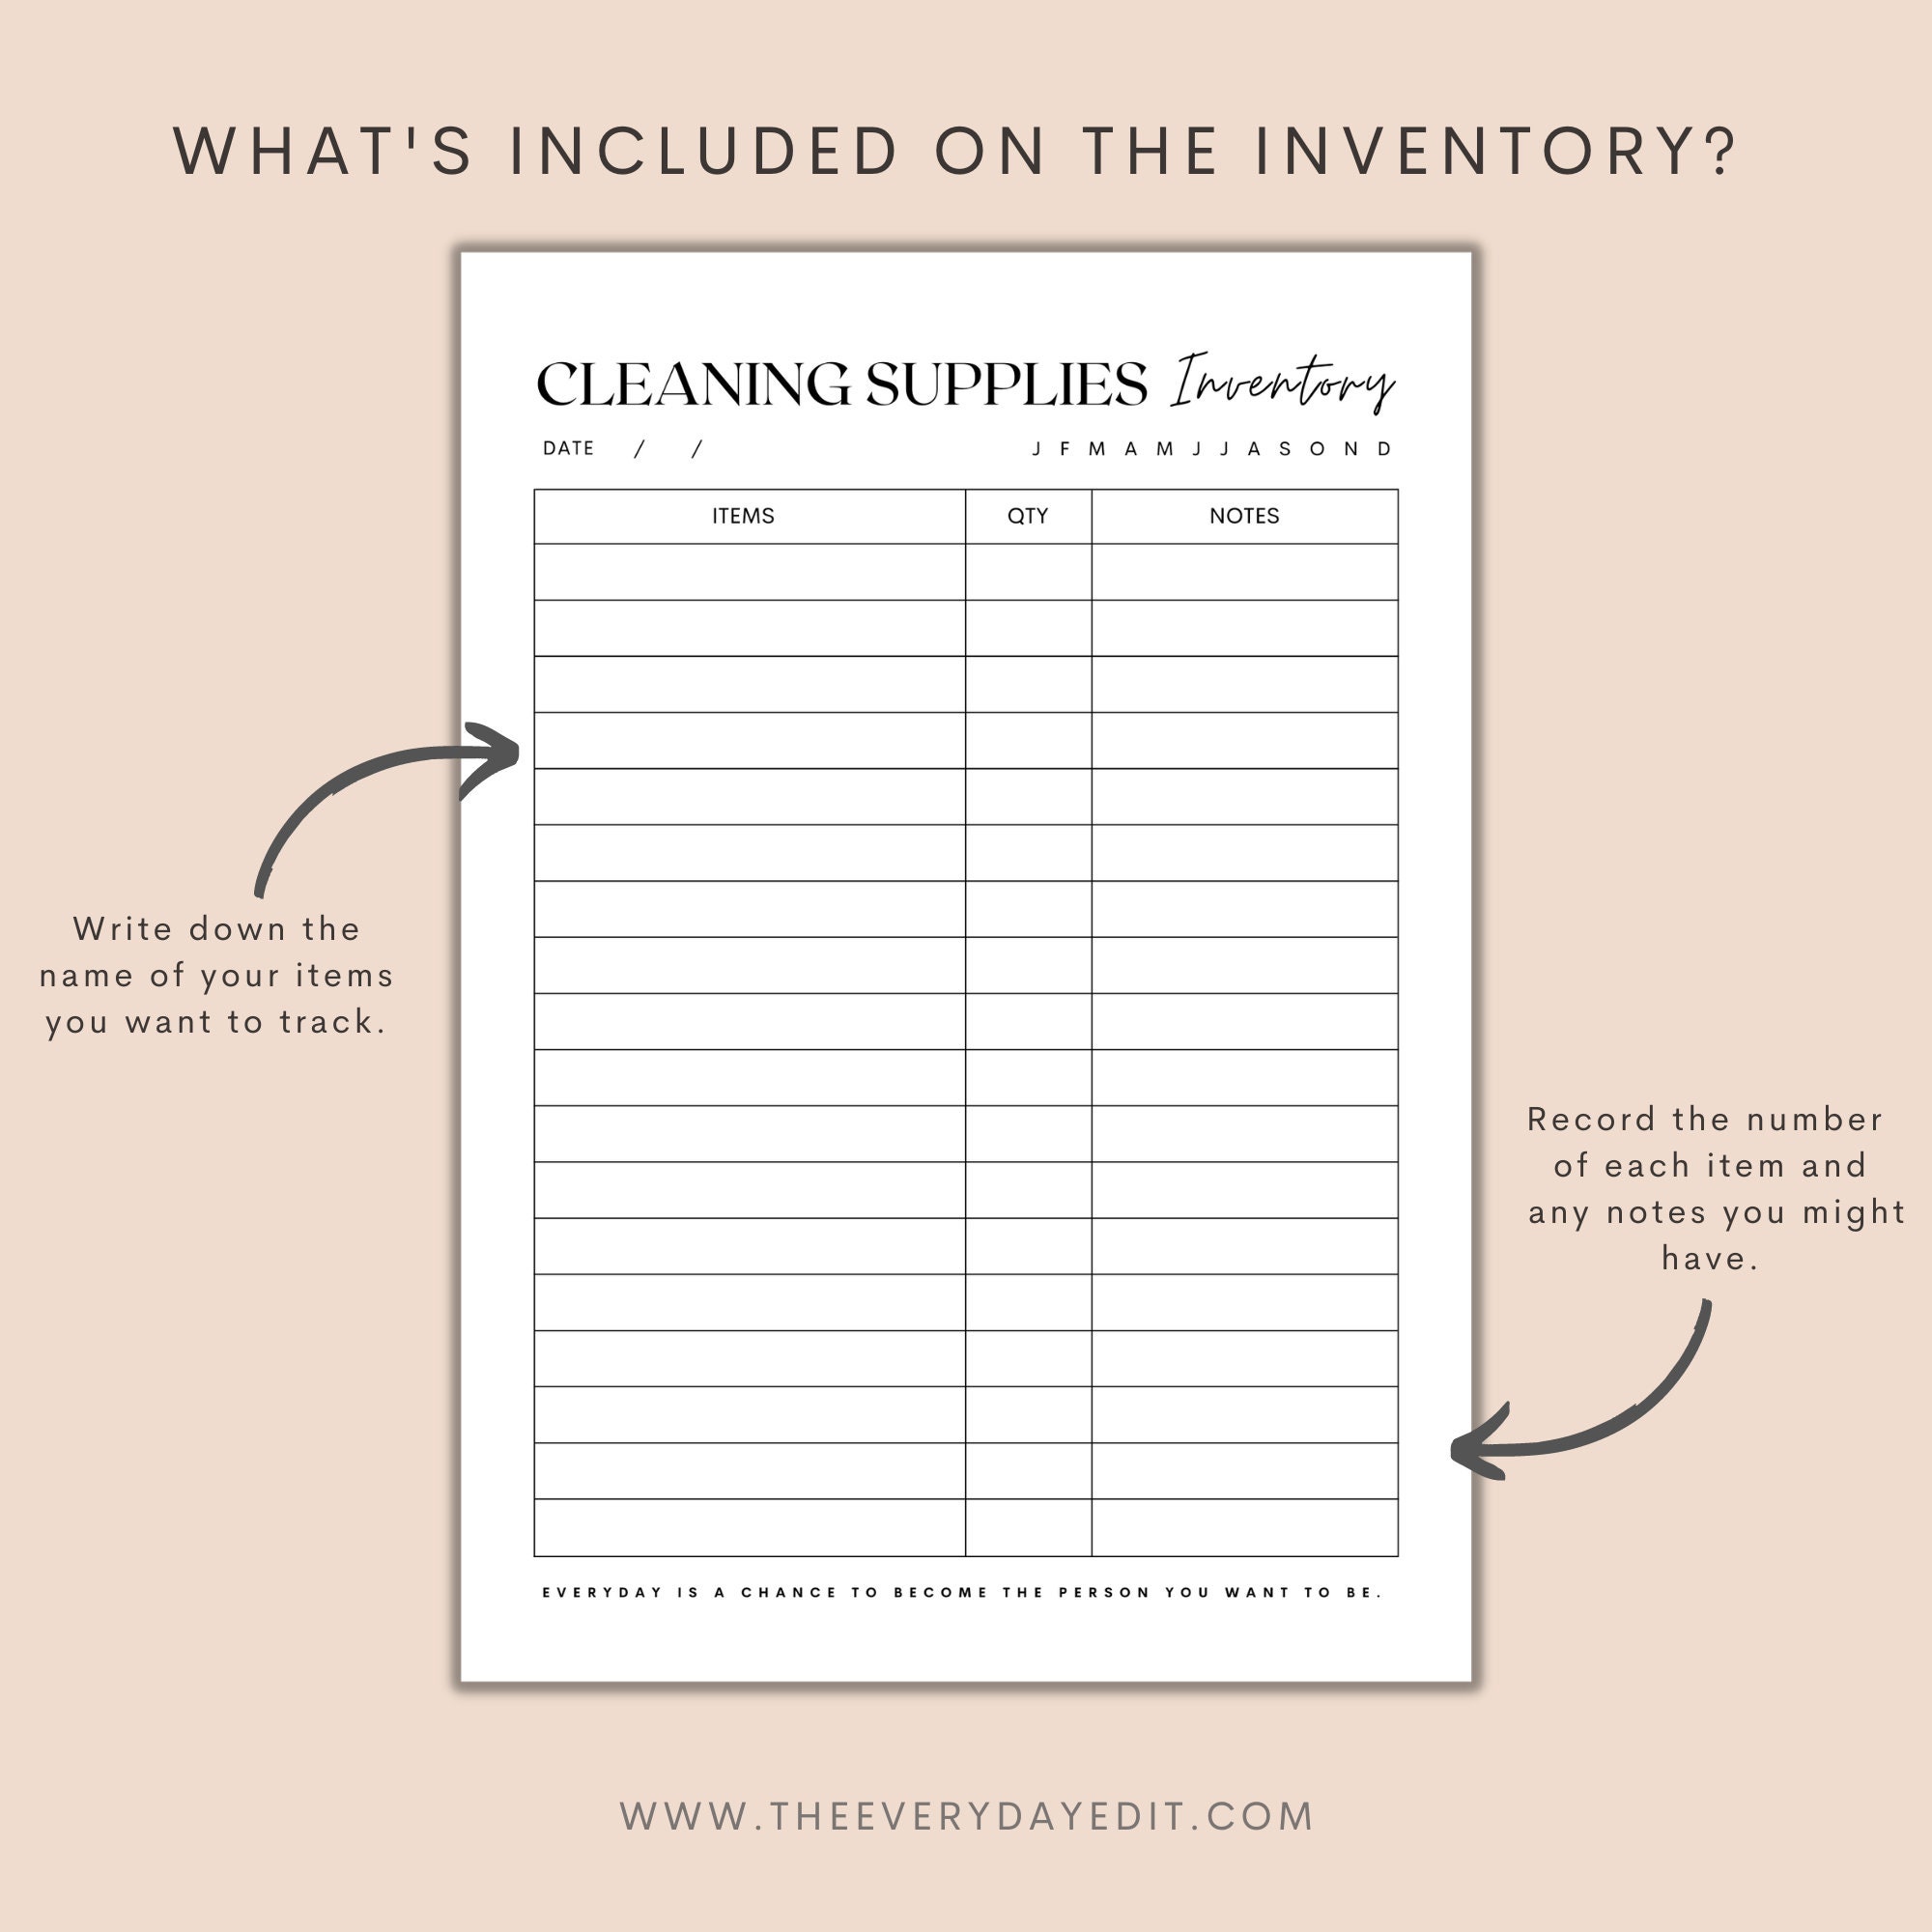 5 Reasons to Maintain Your Inventory of Cleaning Supplies - All